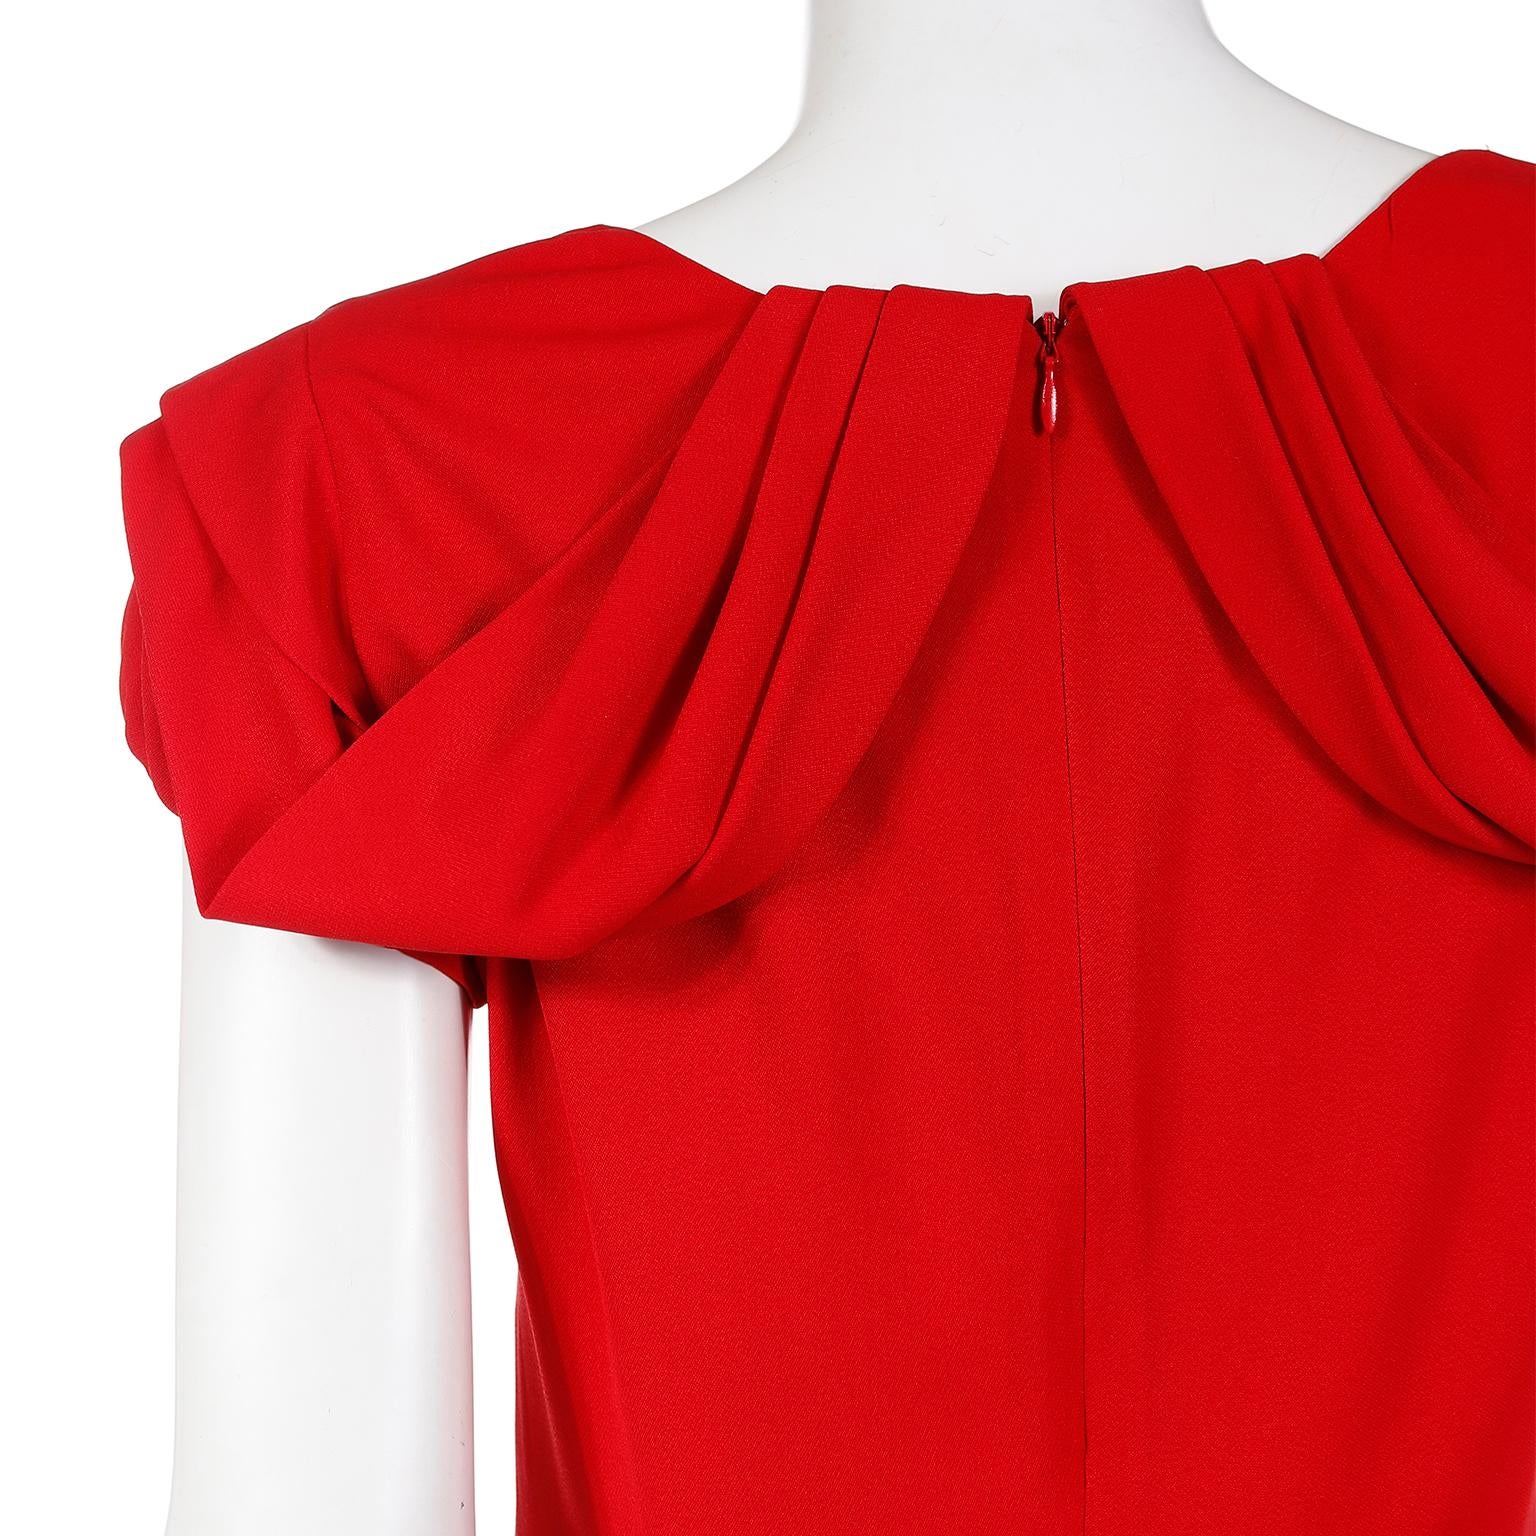 Valentino Red Crepe Vintage Dress With Draping For Sale 2